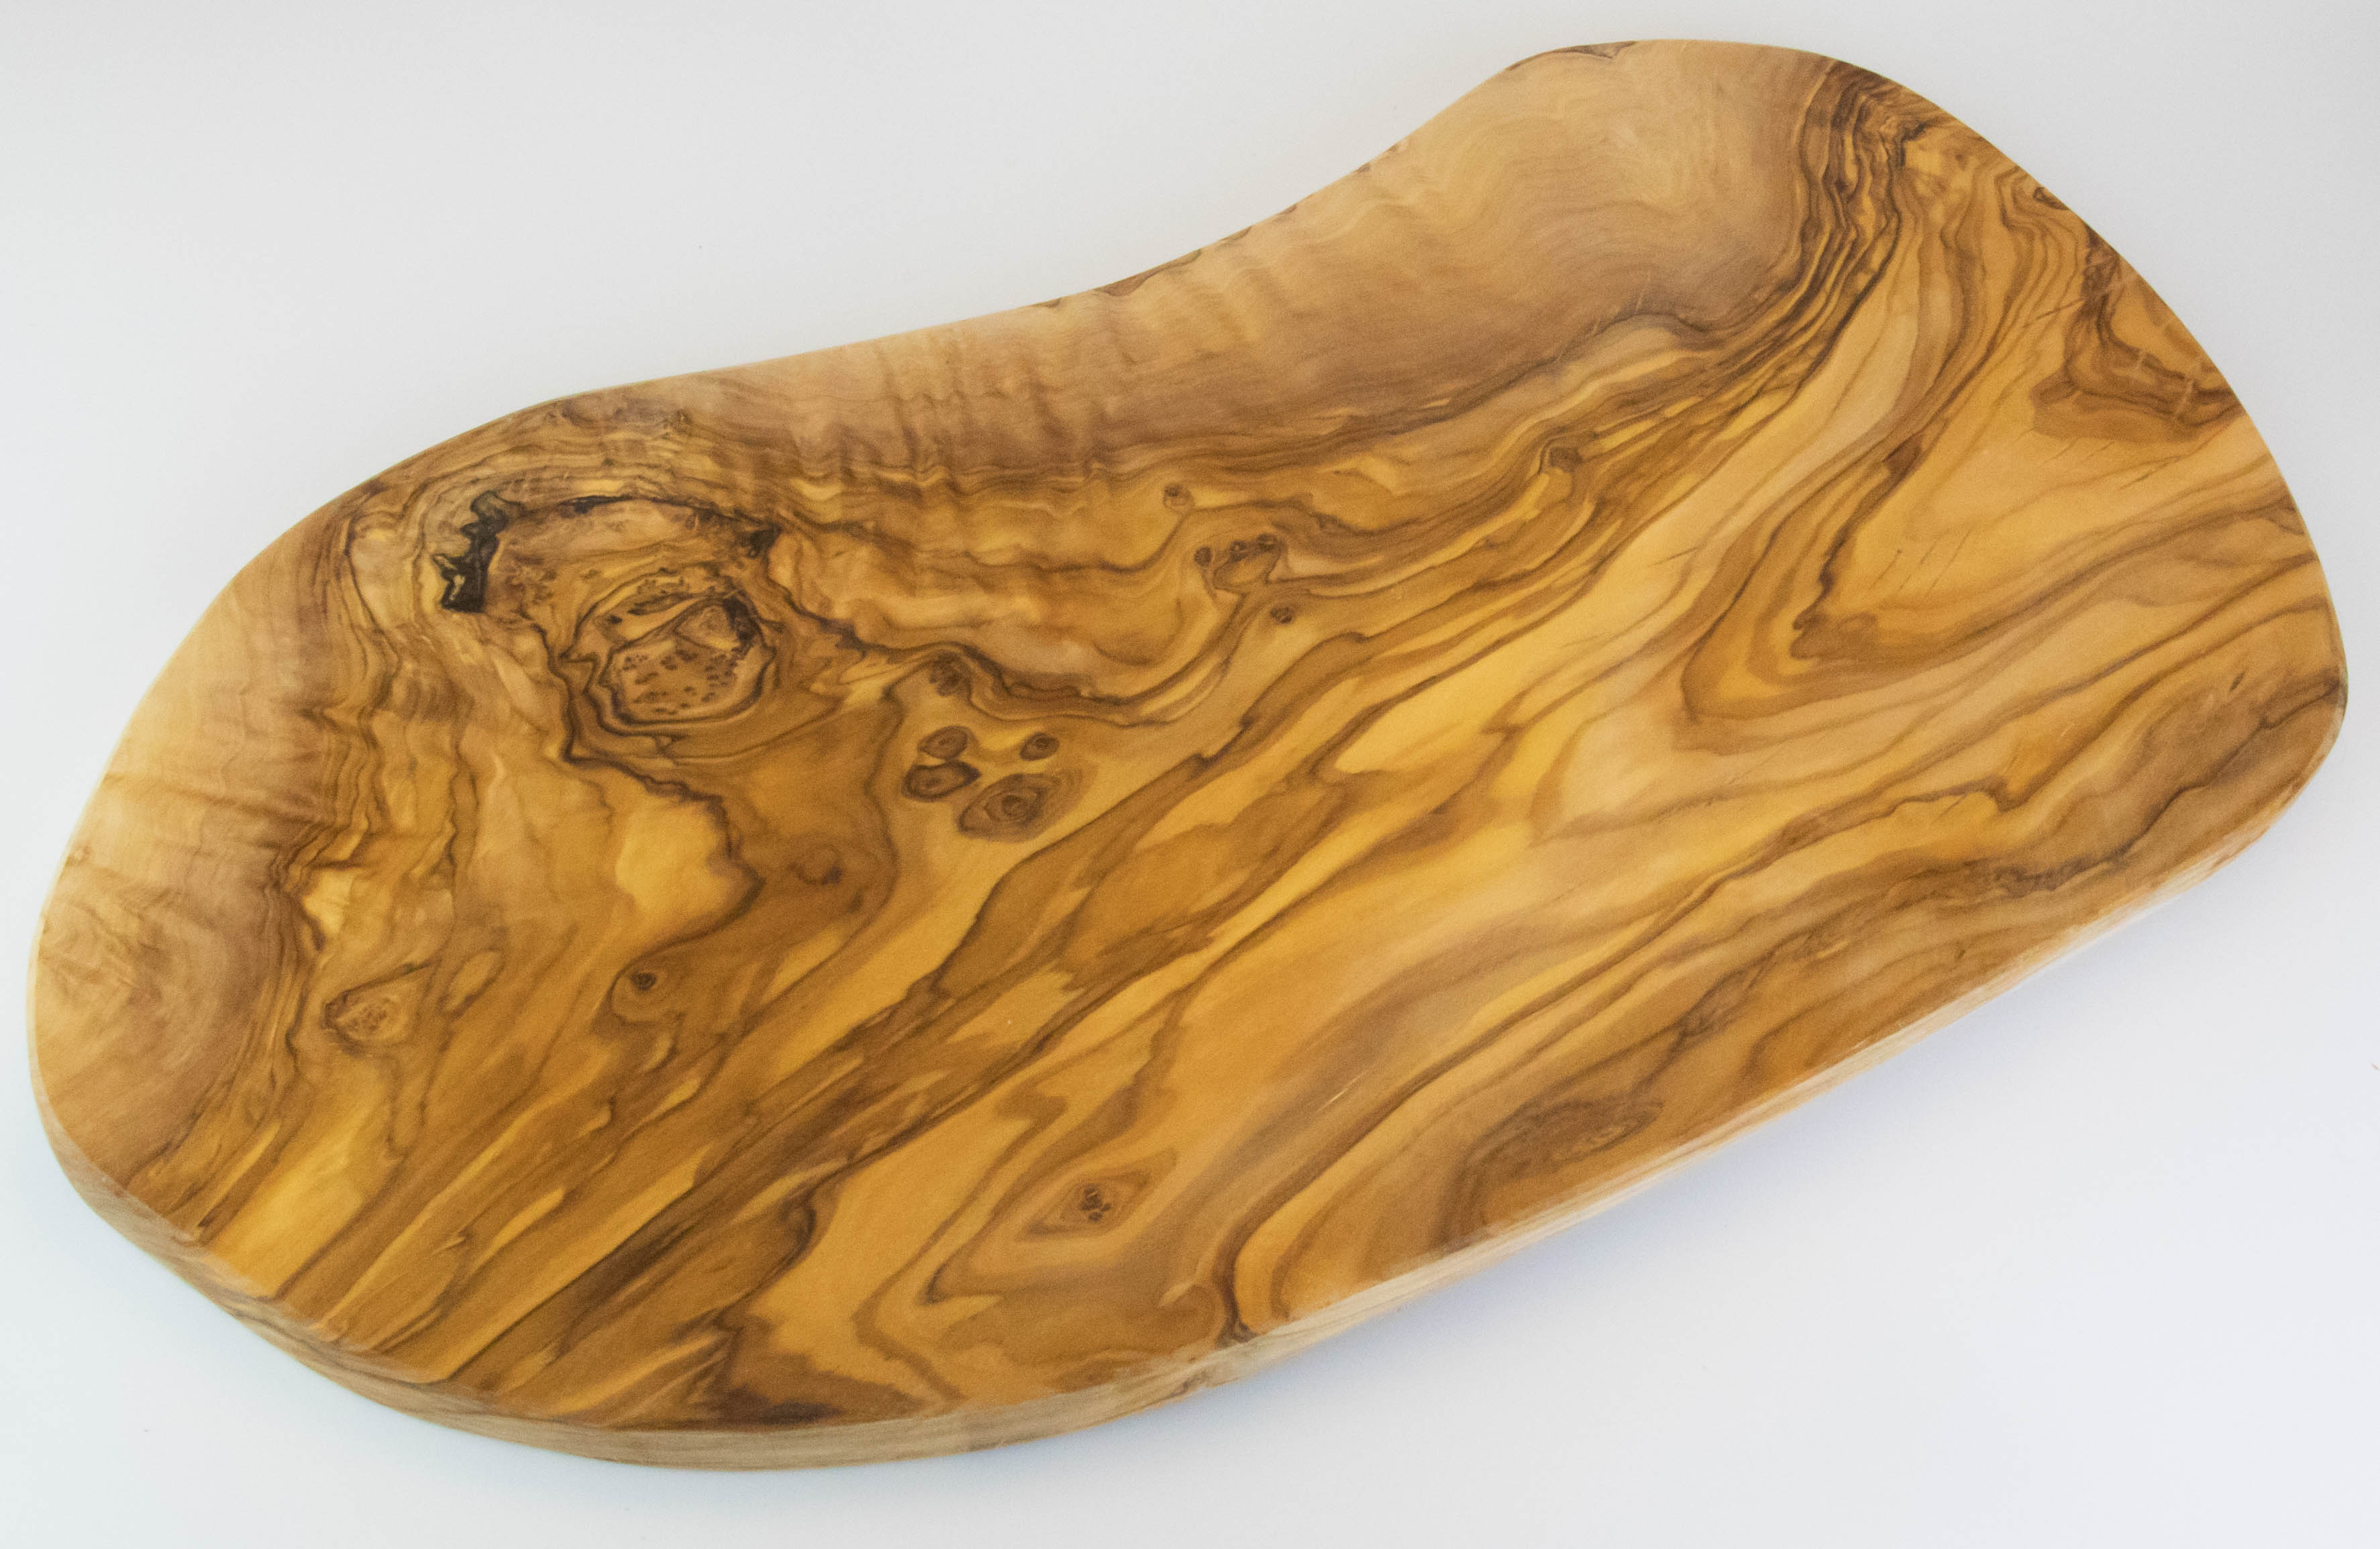 Large and rustic cutting board made of olive wood with a length of 55-60 cm.